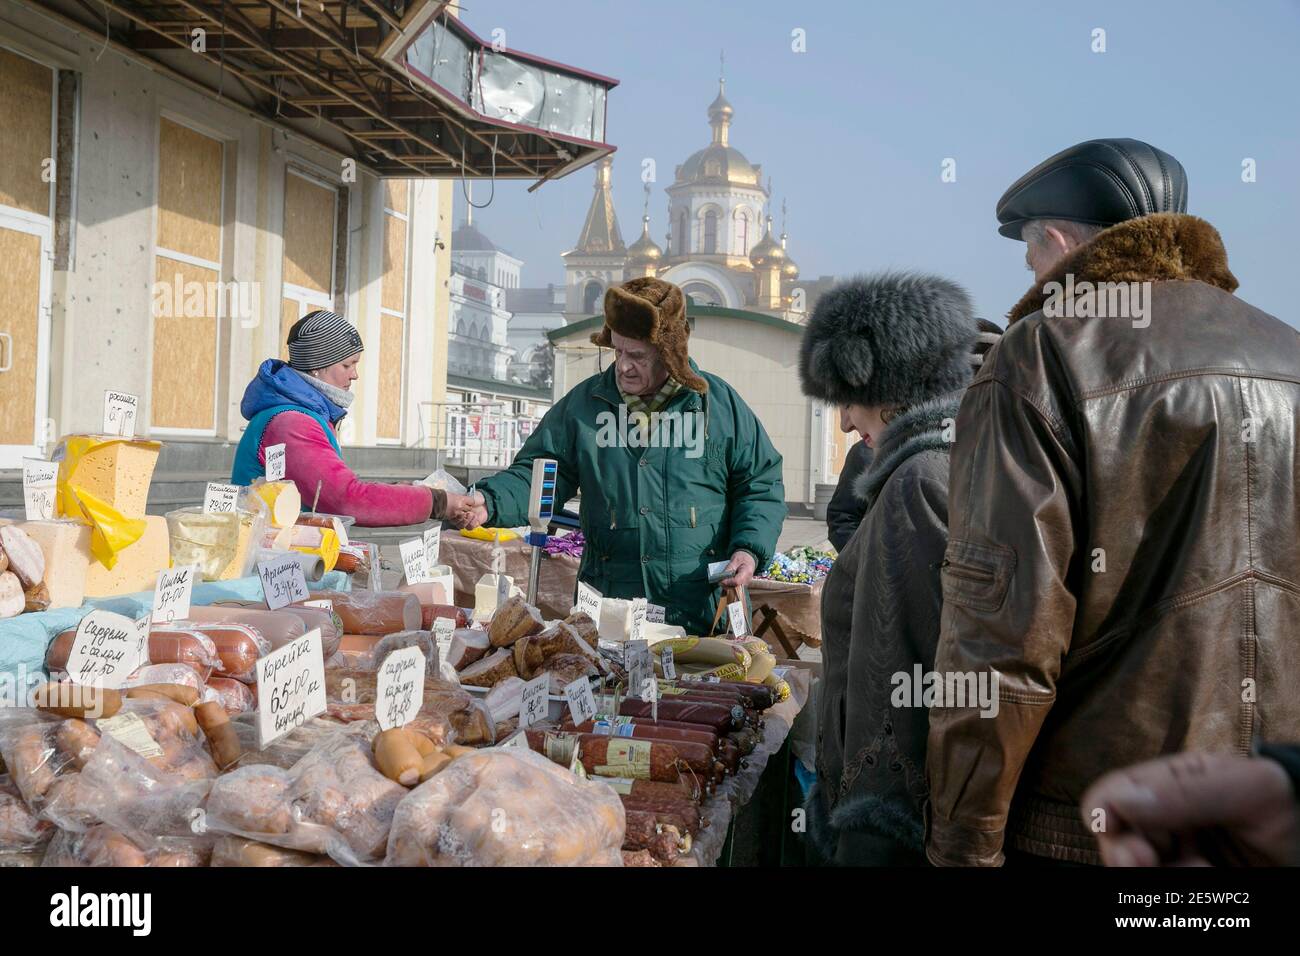 Locals shop at a market in Donetsk, February 15, 2015. The Ukrainian military said on Sunday a ceasefire between government troops and pro-Russian separatists in east Ukraine is being observed 'in general' and that rebel attacks are infrequent and not widespread.  REUTERS/Baz Ratner (UKRAINE - Tags: CIVIL UNREST POLITICS CONFLICT SOCIETY) Stock Photo